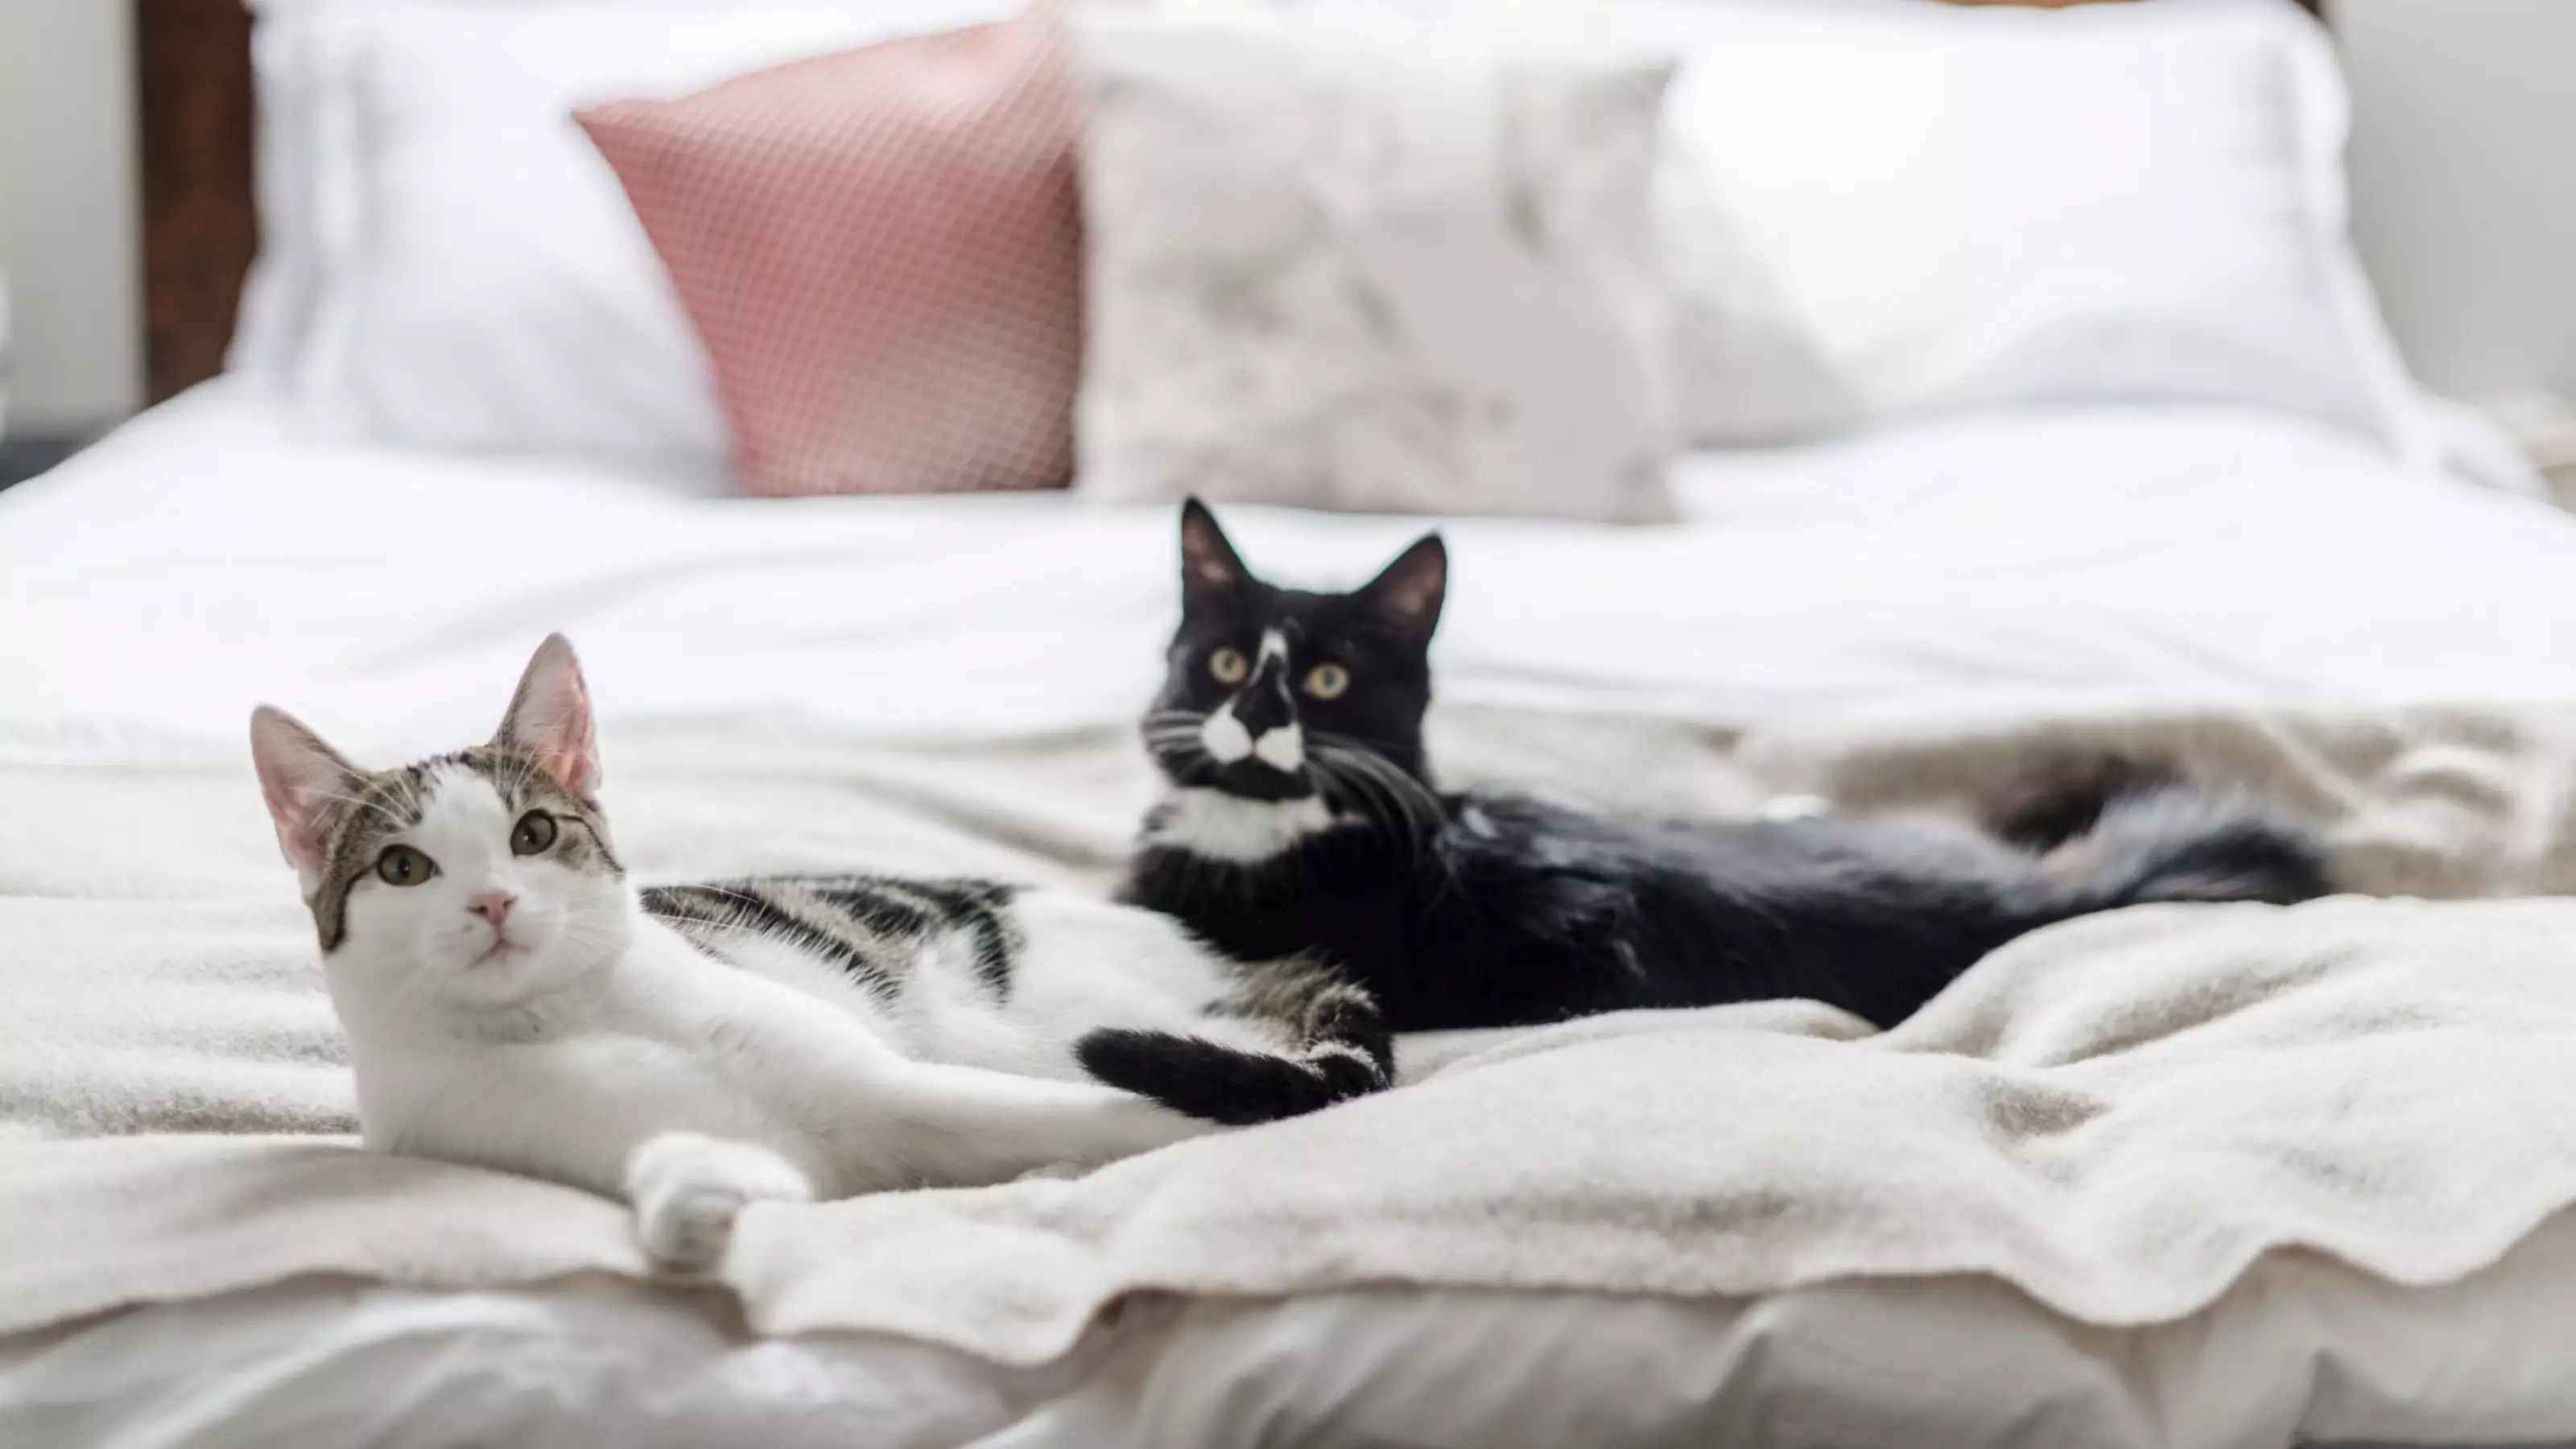 a tabby cat and a black and white cat lie next to each other on a bed